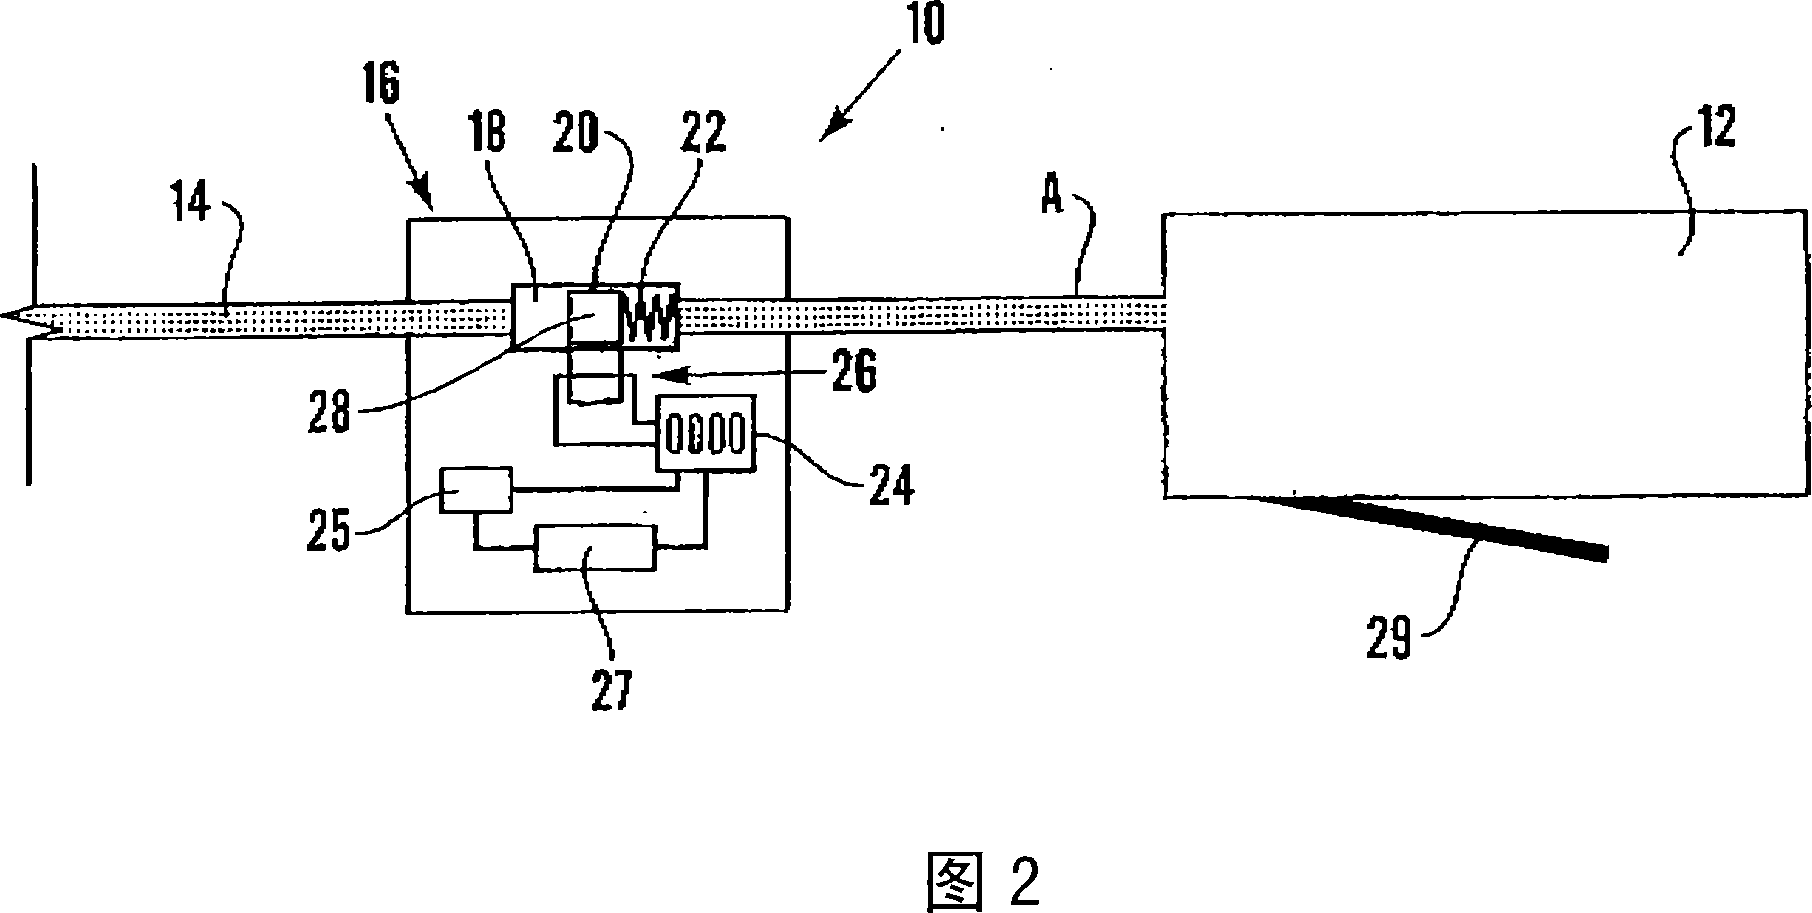 Tool monitoring device